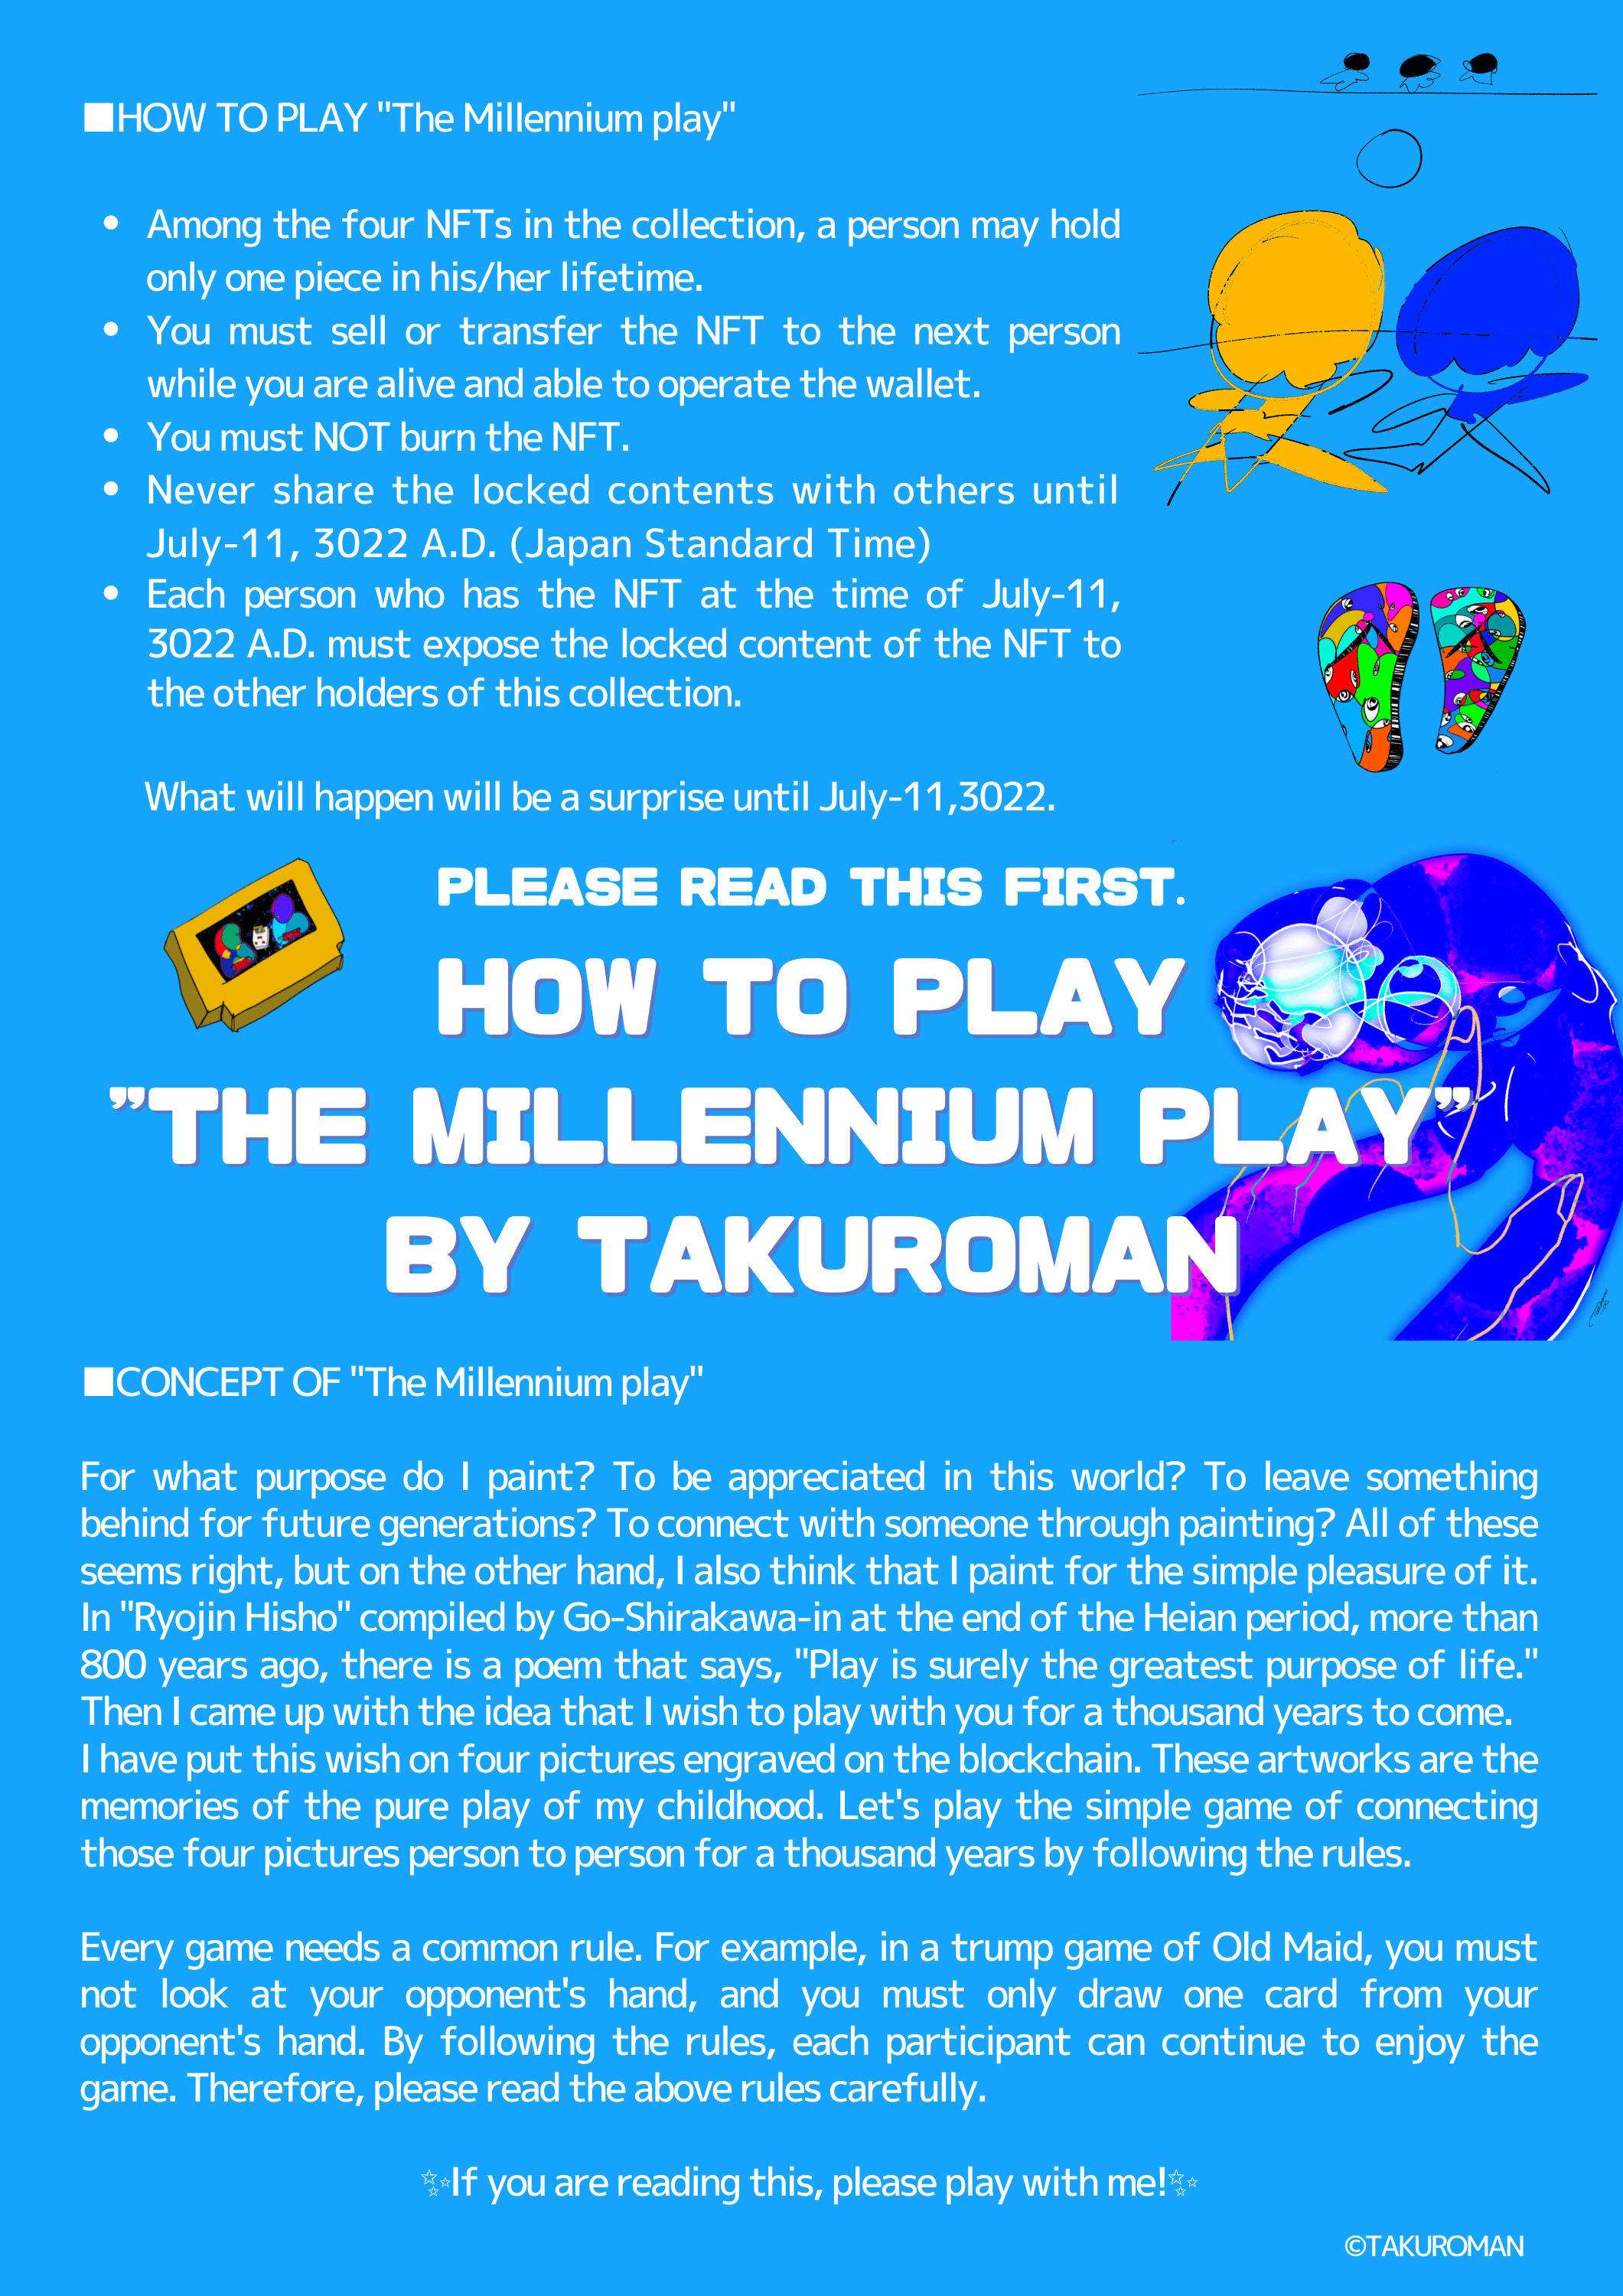 READ THIS FIRST PLEASE. Rules and Concept of the collection "The Millennium Play" by TAKUROMAN